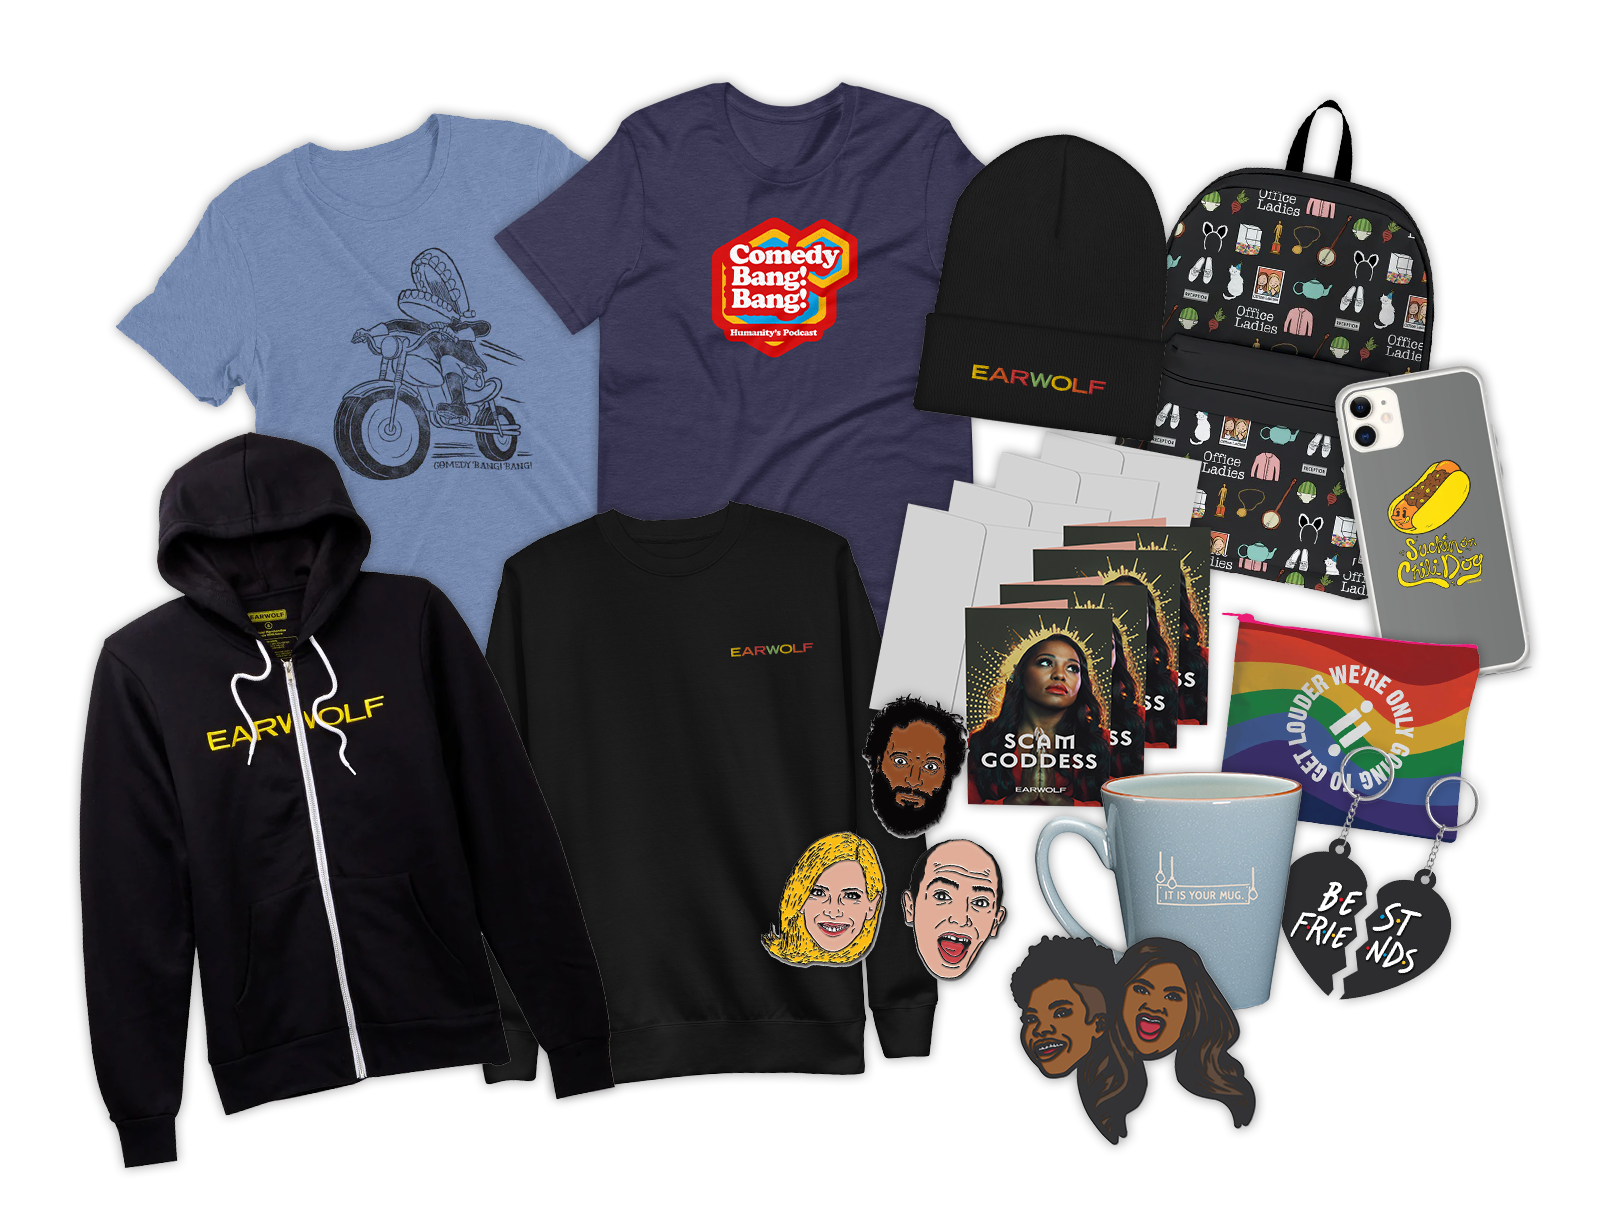 A collage of various Earwolf merch items.